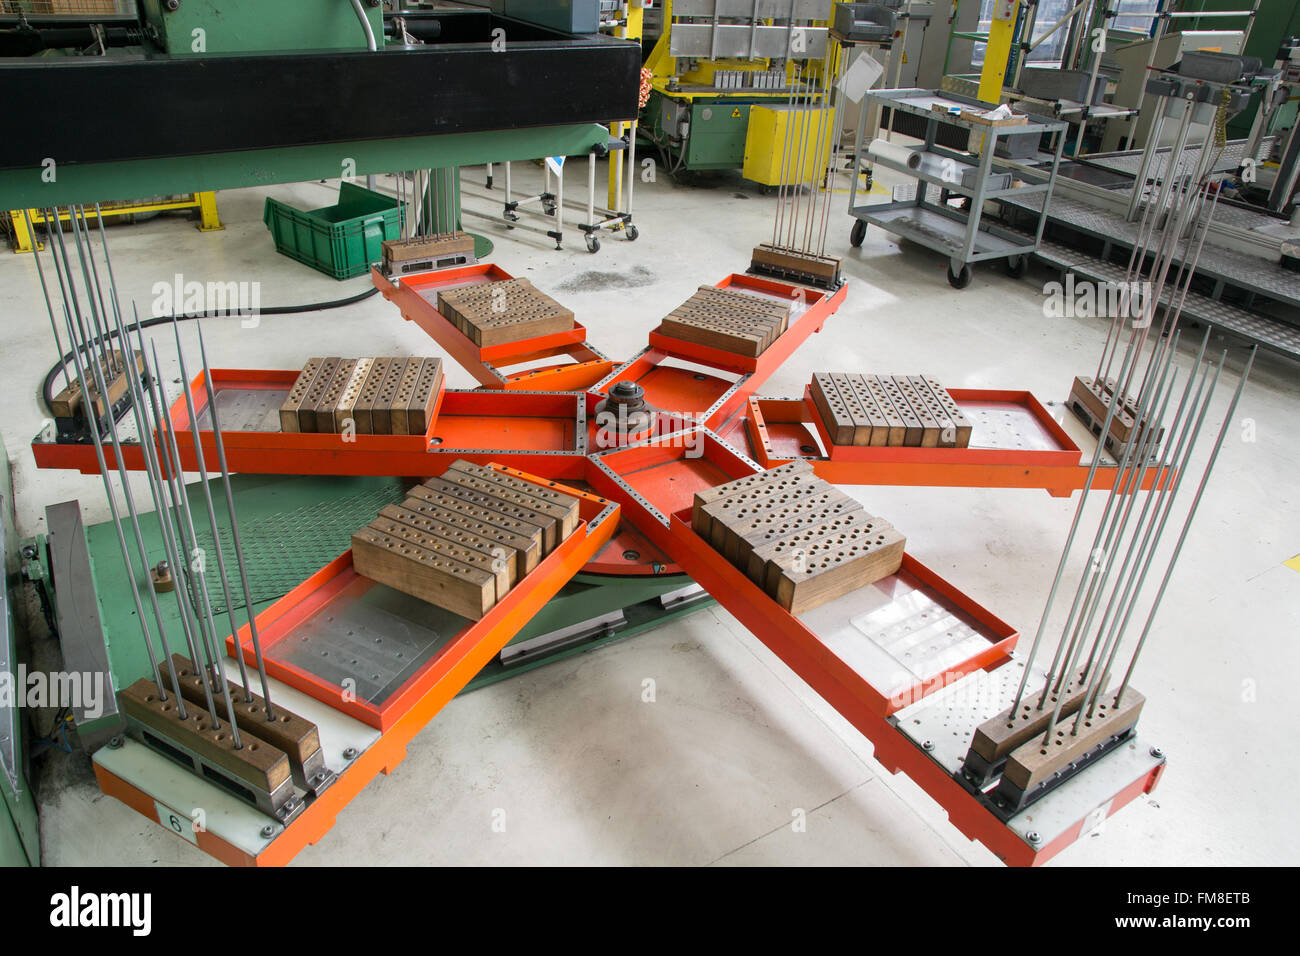 Revolving platform on which the press deposits the aluminum fins. Stock Photo